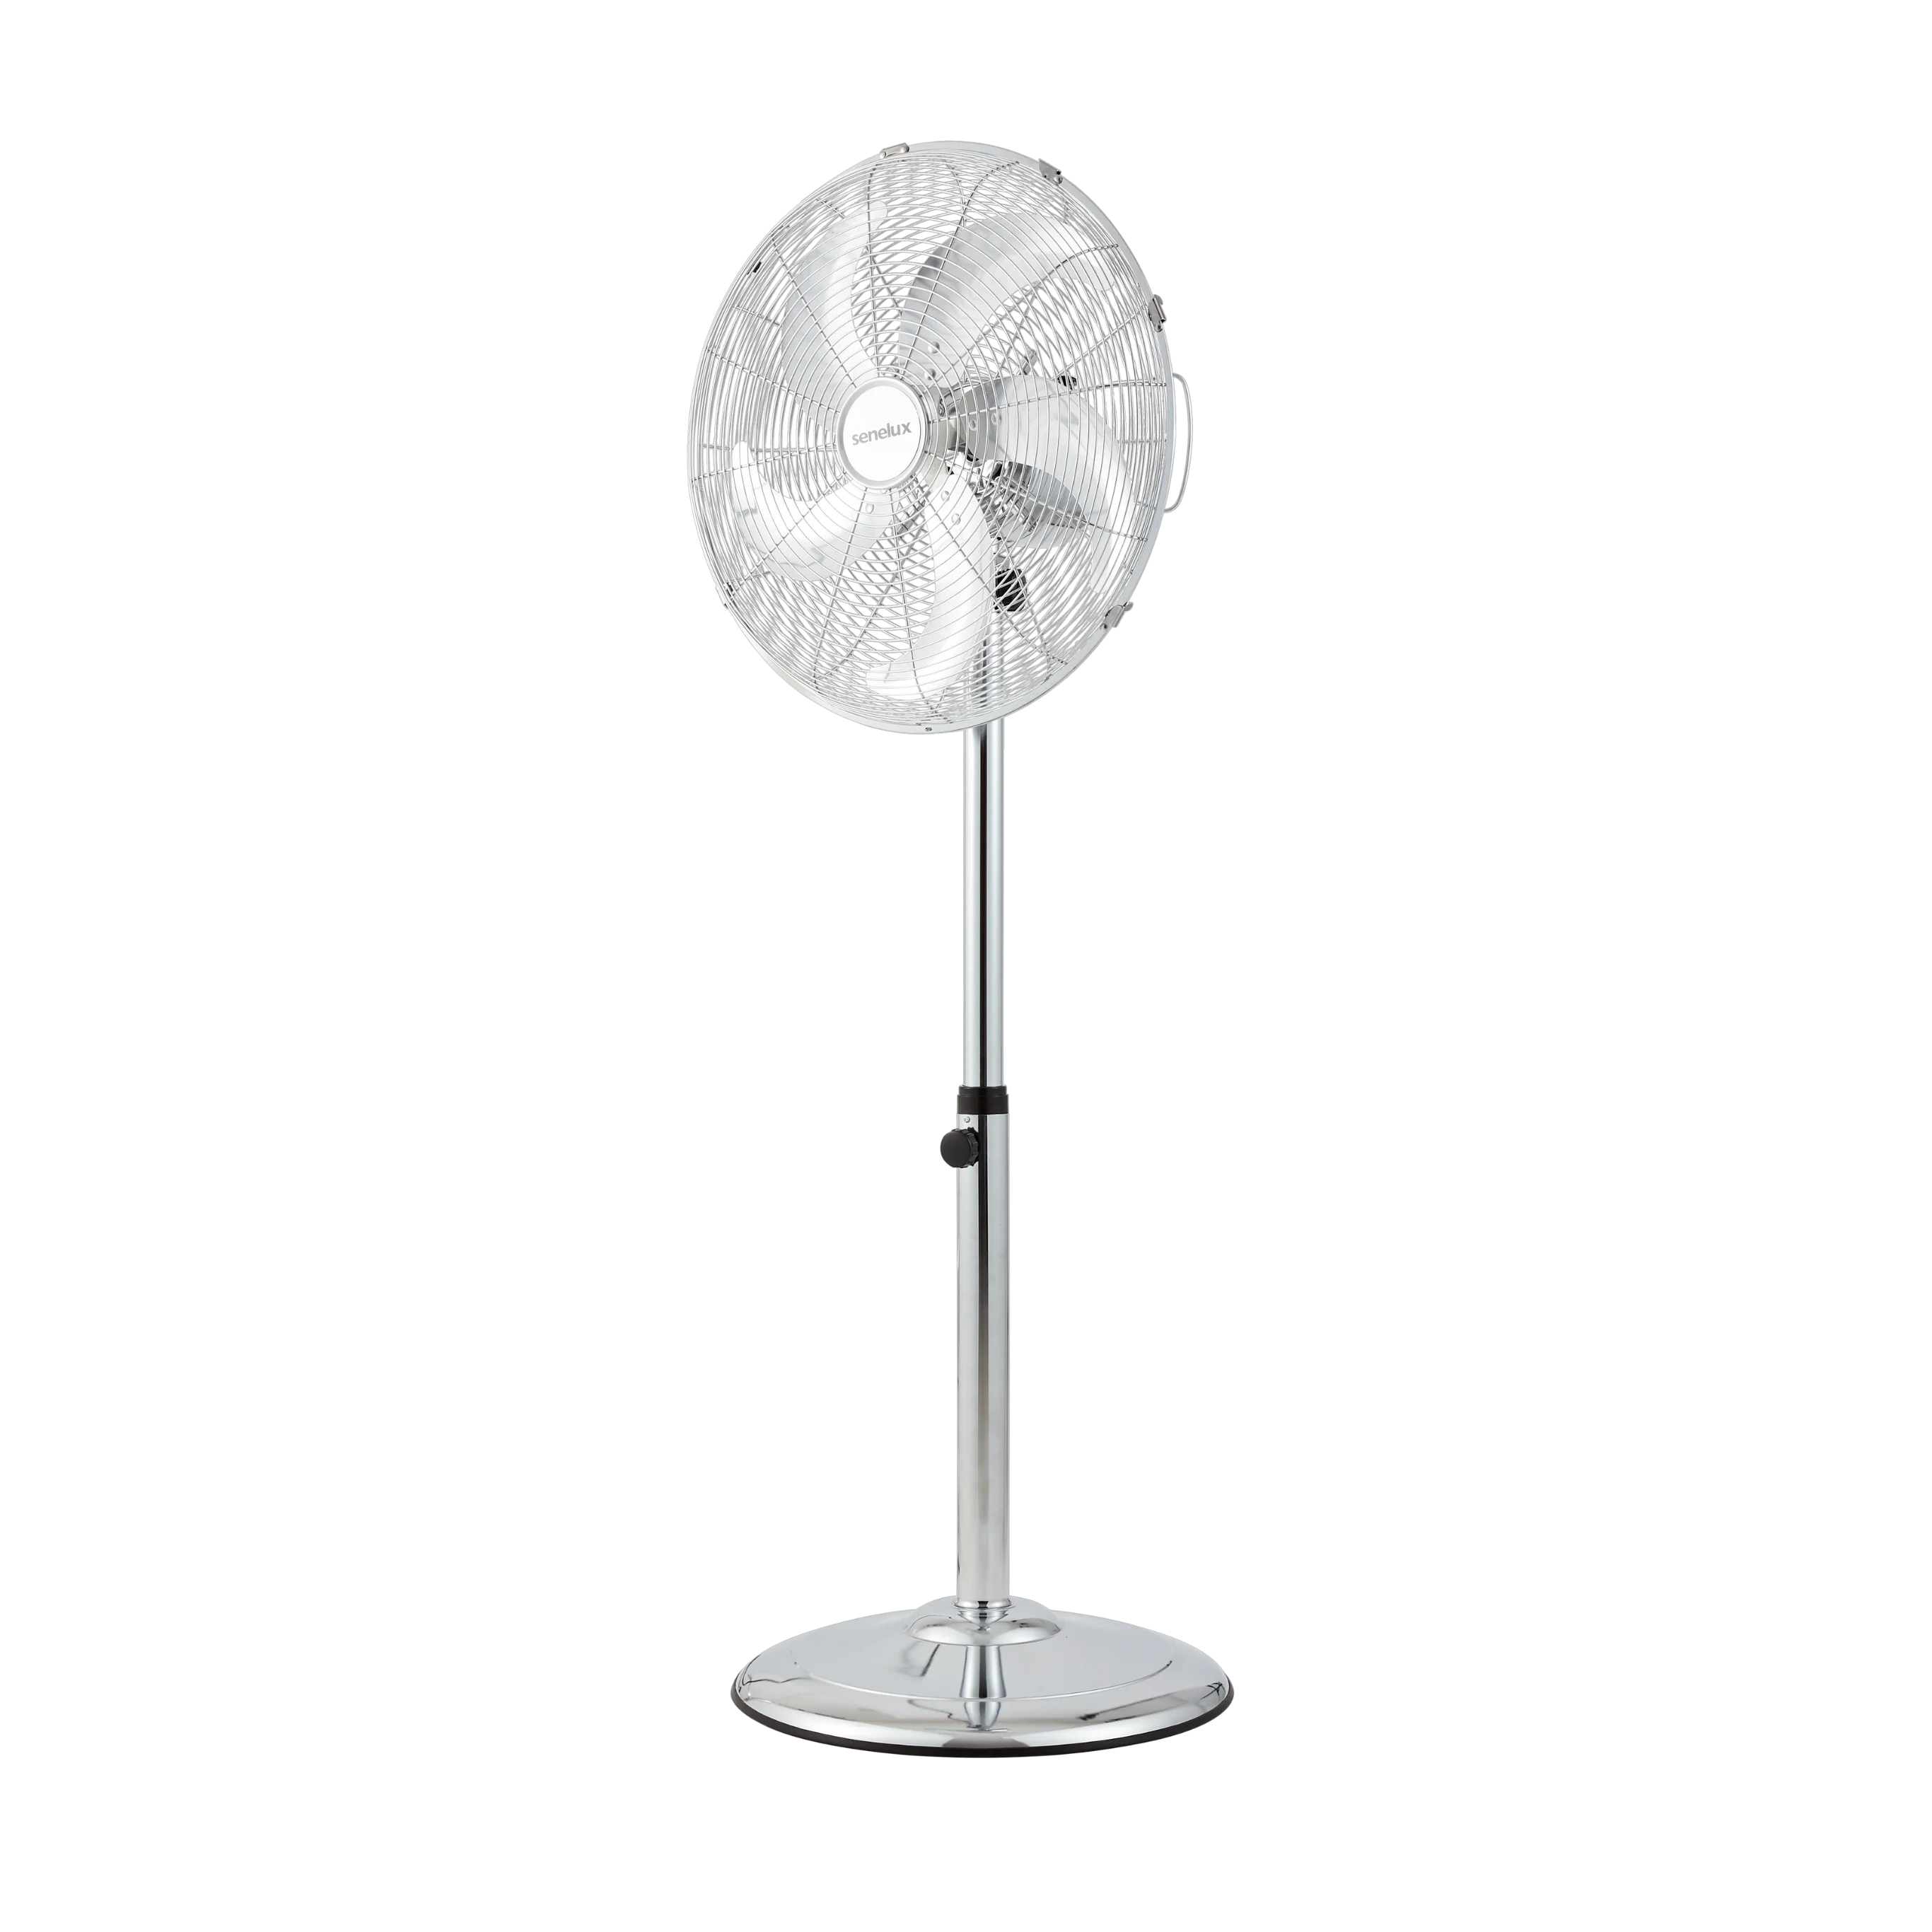 A picture of the chrome 16 inch pedestal fan with an adjustable telescopic neck and adjustable fan head.